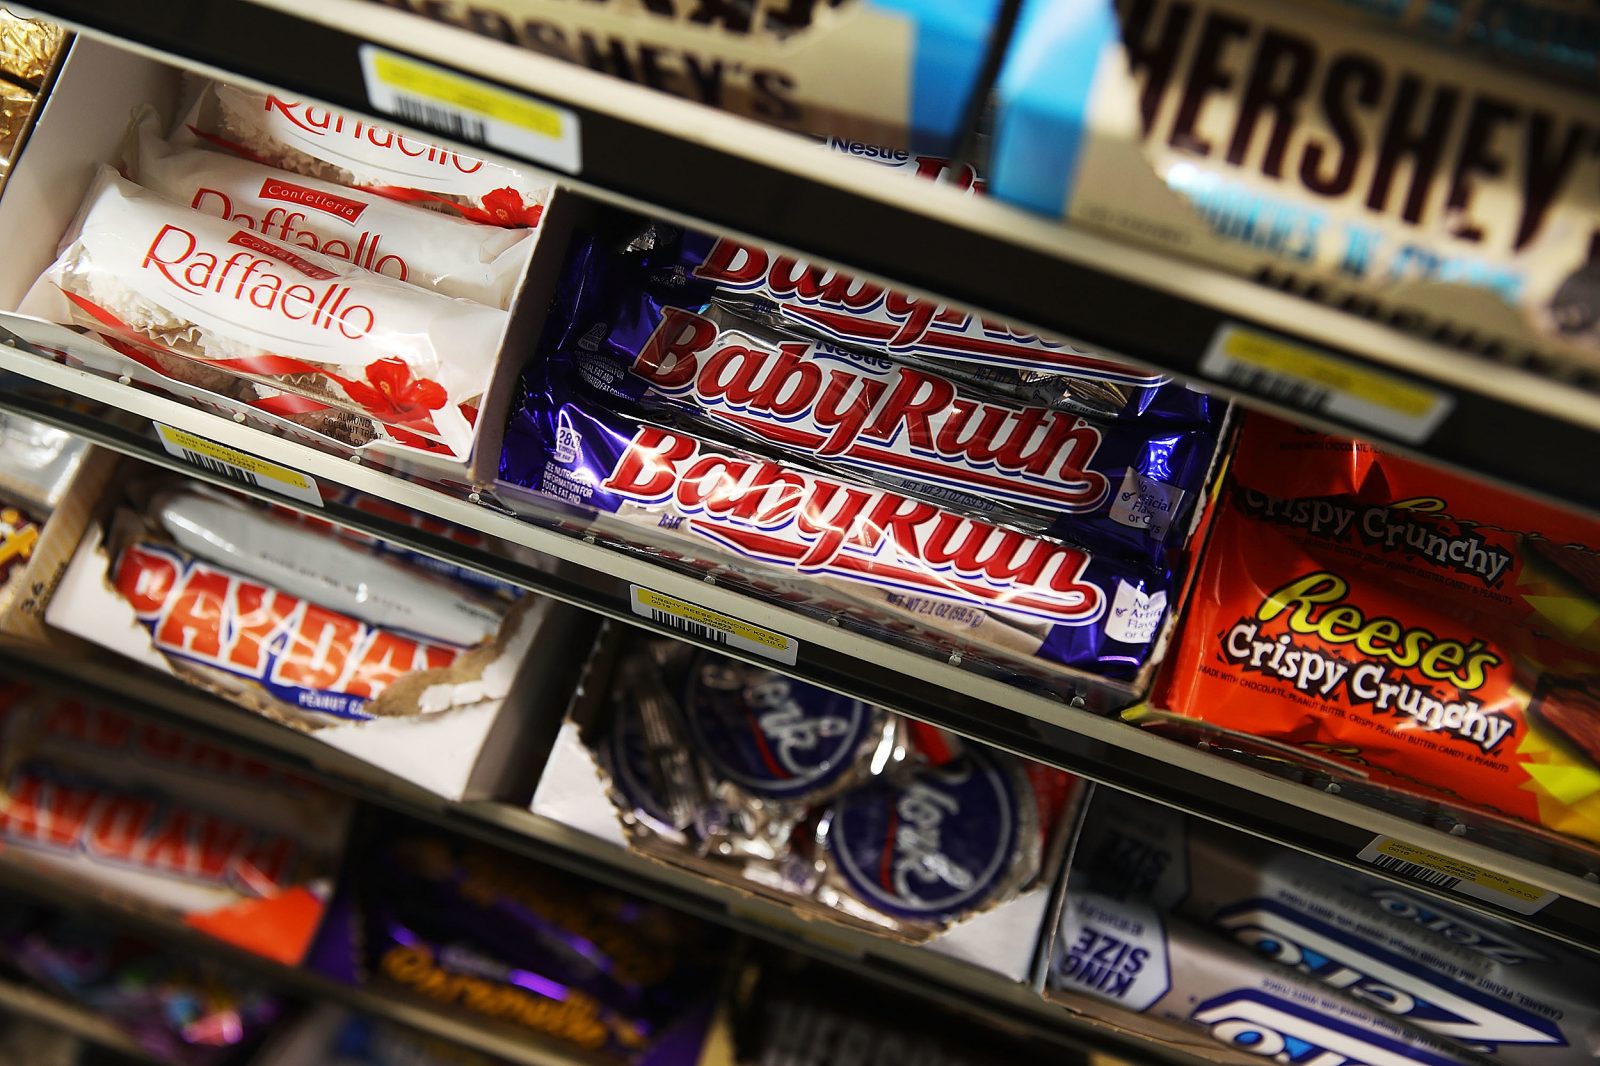 🛒 Shop at a Supermarket and If You Pay Under $25, You Win! candy bars